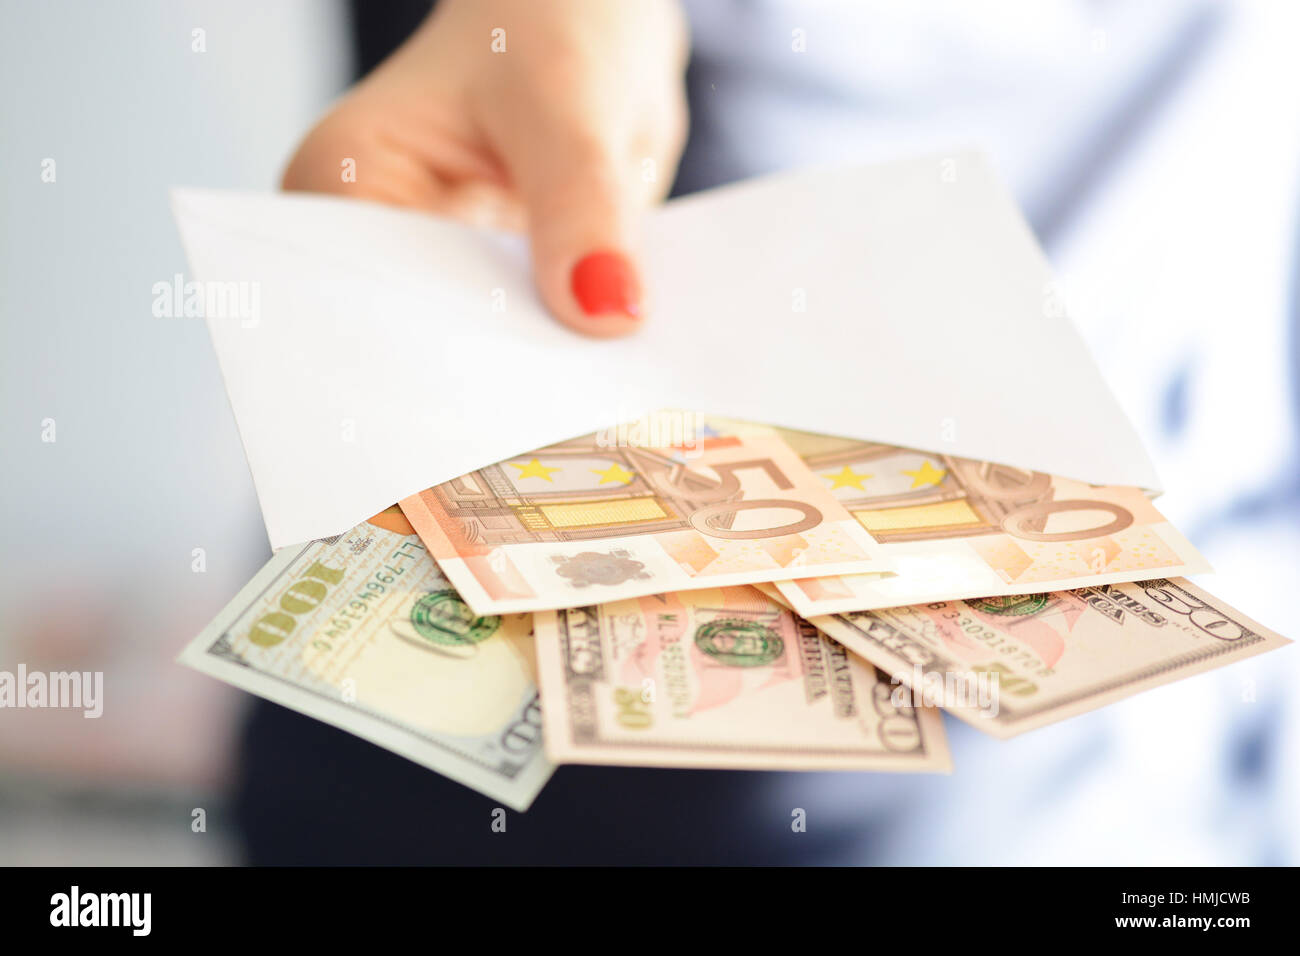 Woman handing out an envelope stuffed with euros and US dollar banknotes as bribe Stock Photo